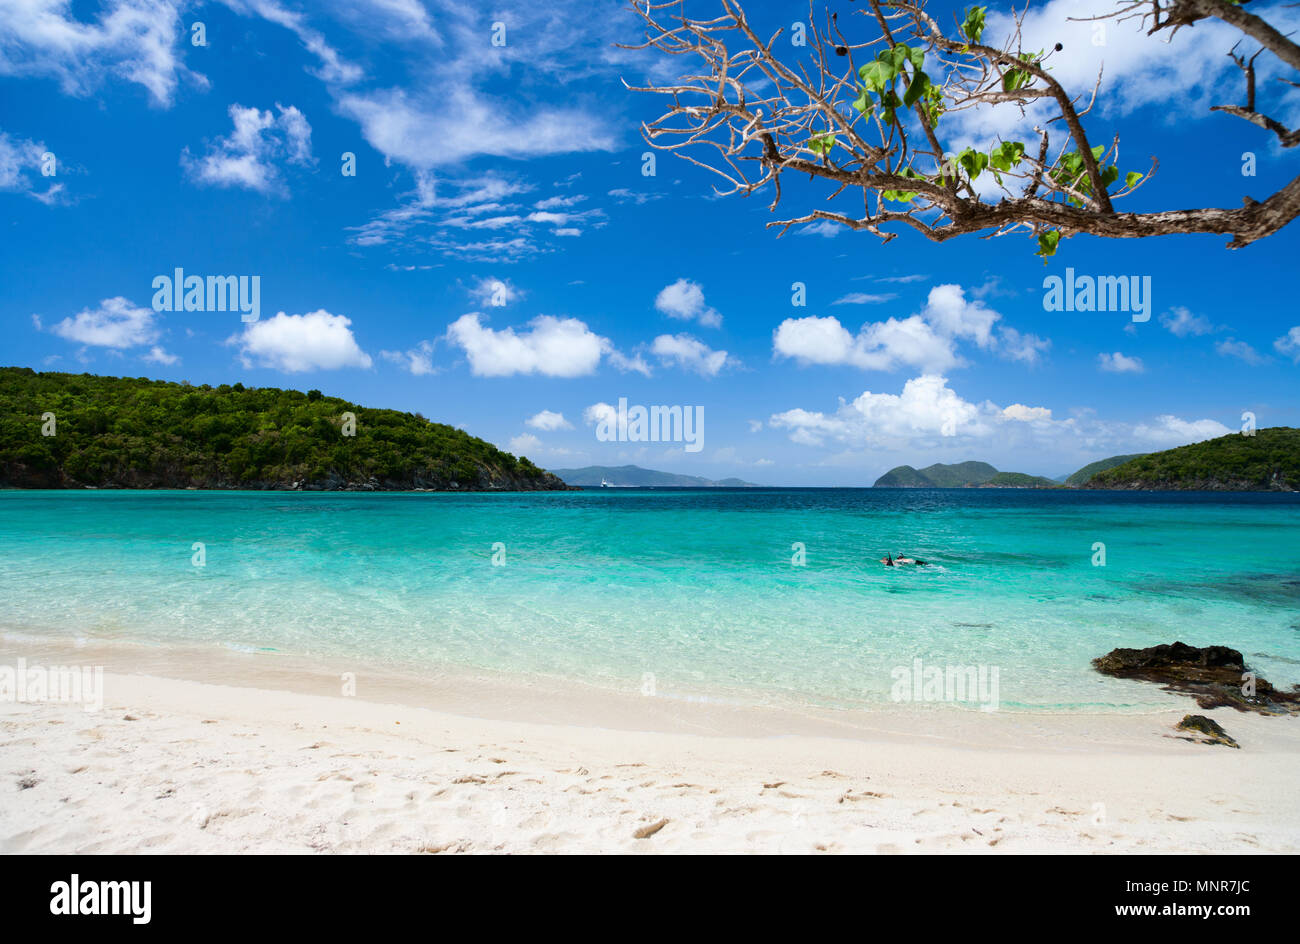 Beautiful tropical beach with white sand, turquoise ocean water and blue sky at St John, US Virgin Islands in Caribbean Stock Photo